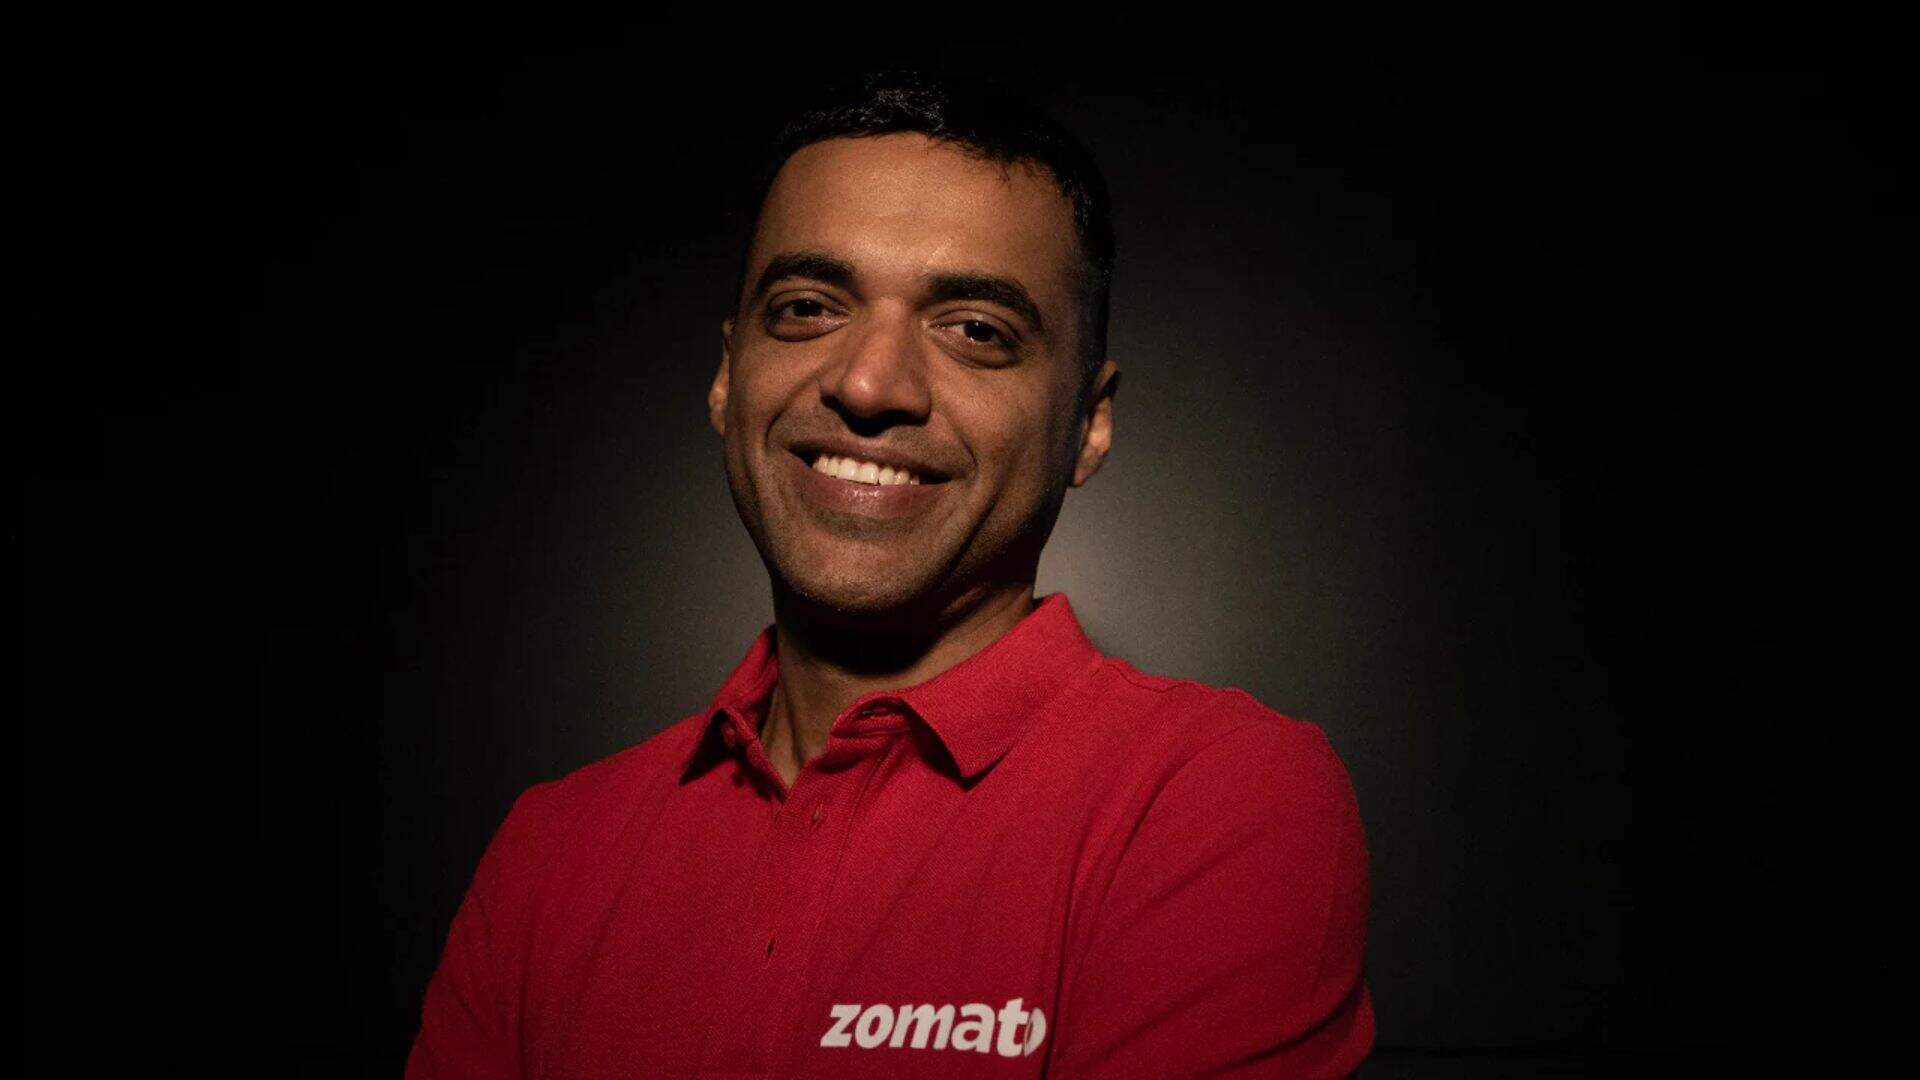 Zomato CEO Deepinder Goyal Faces Mockery, Here’s Why